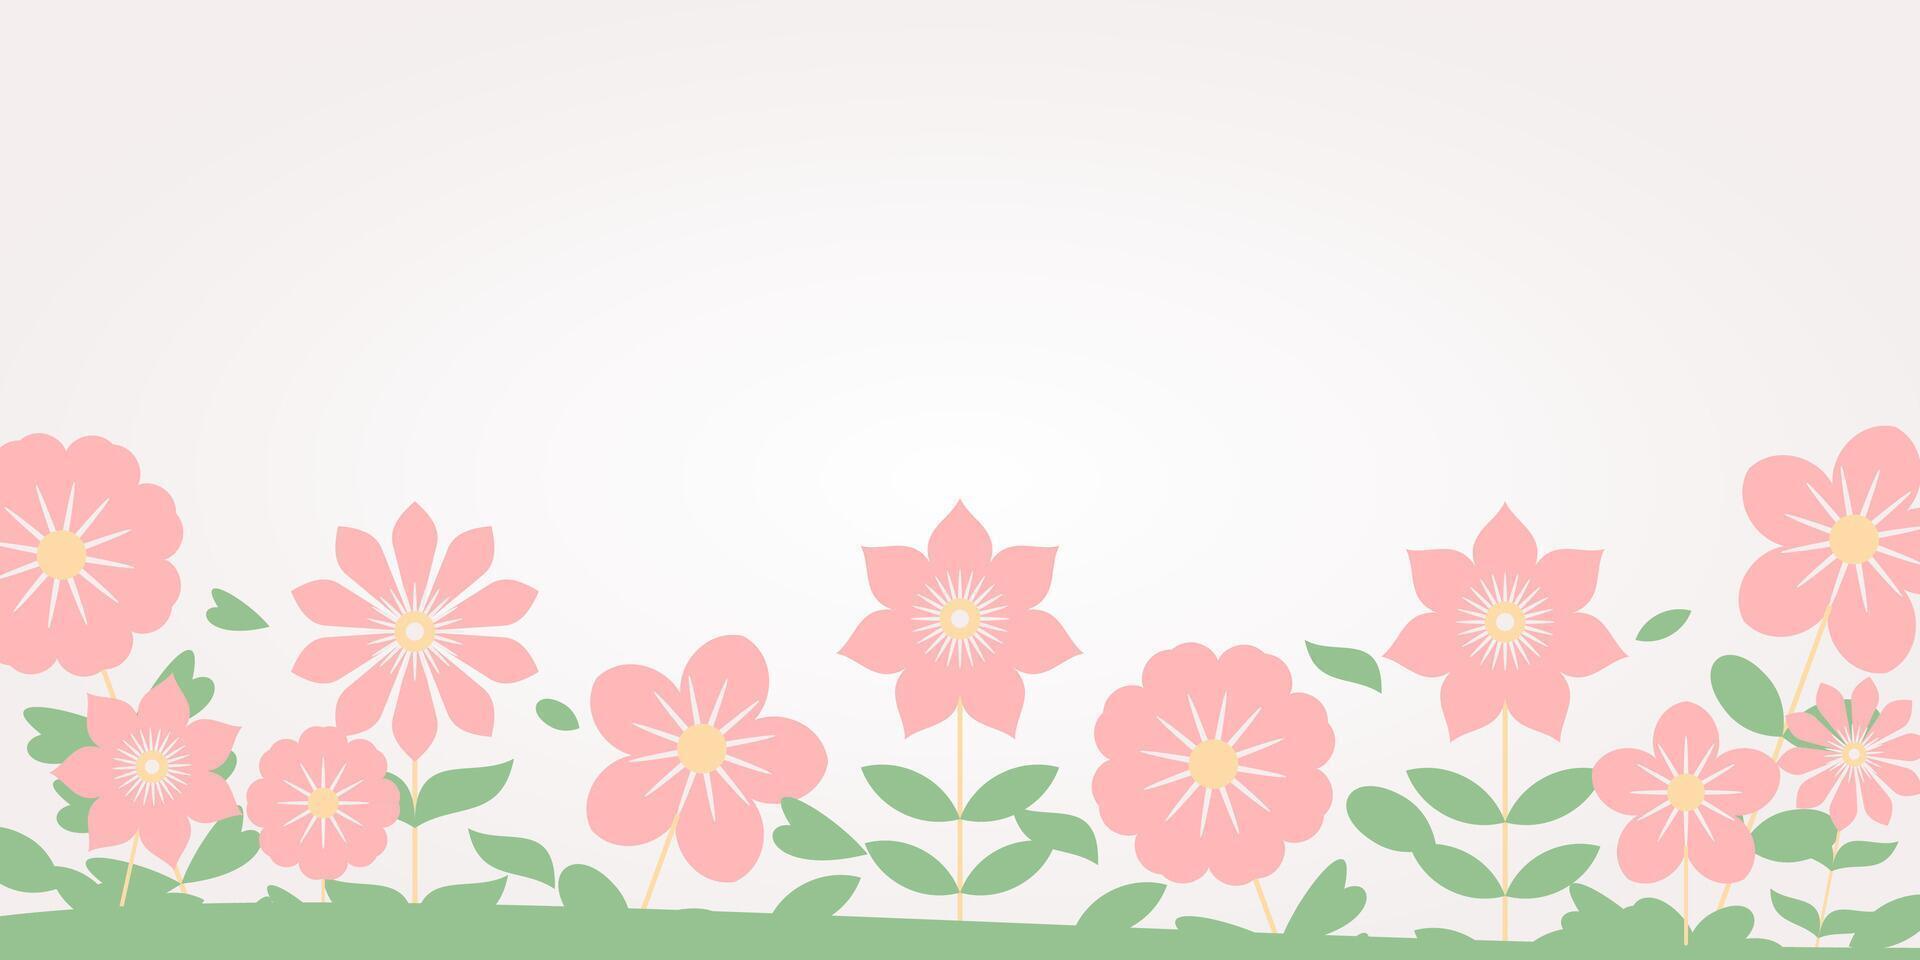 Pink Spring Background with Beautiful Flowers, Free Copy Space Area. Design for Banners, Posters, Greeting Cards, Web, Social Media. vector